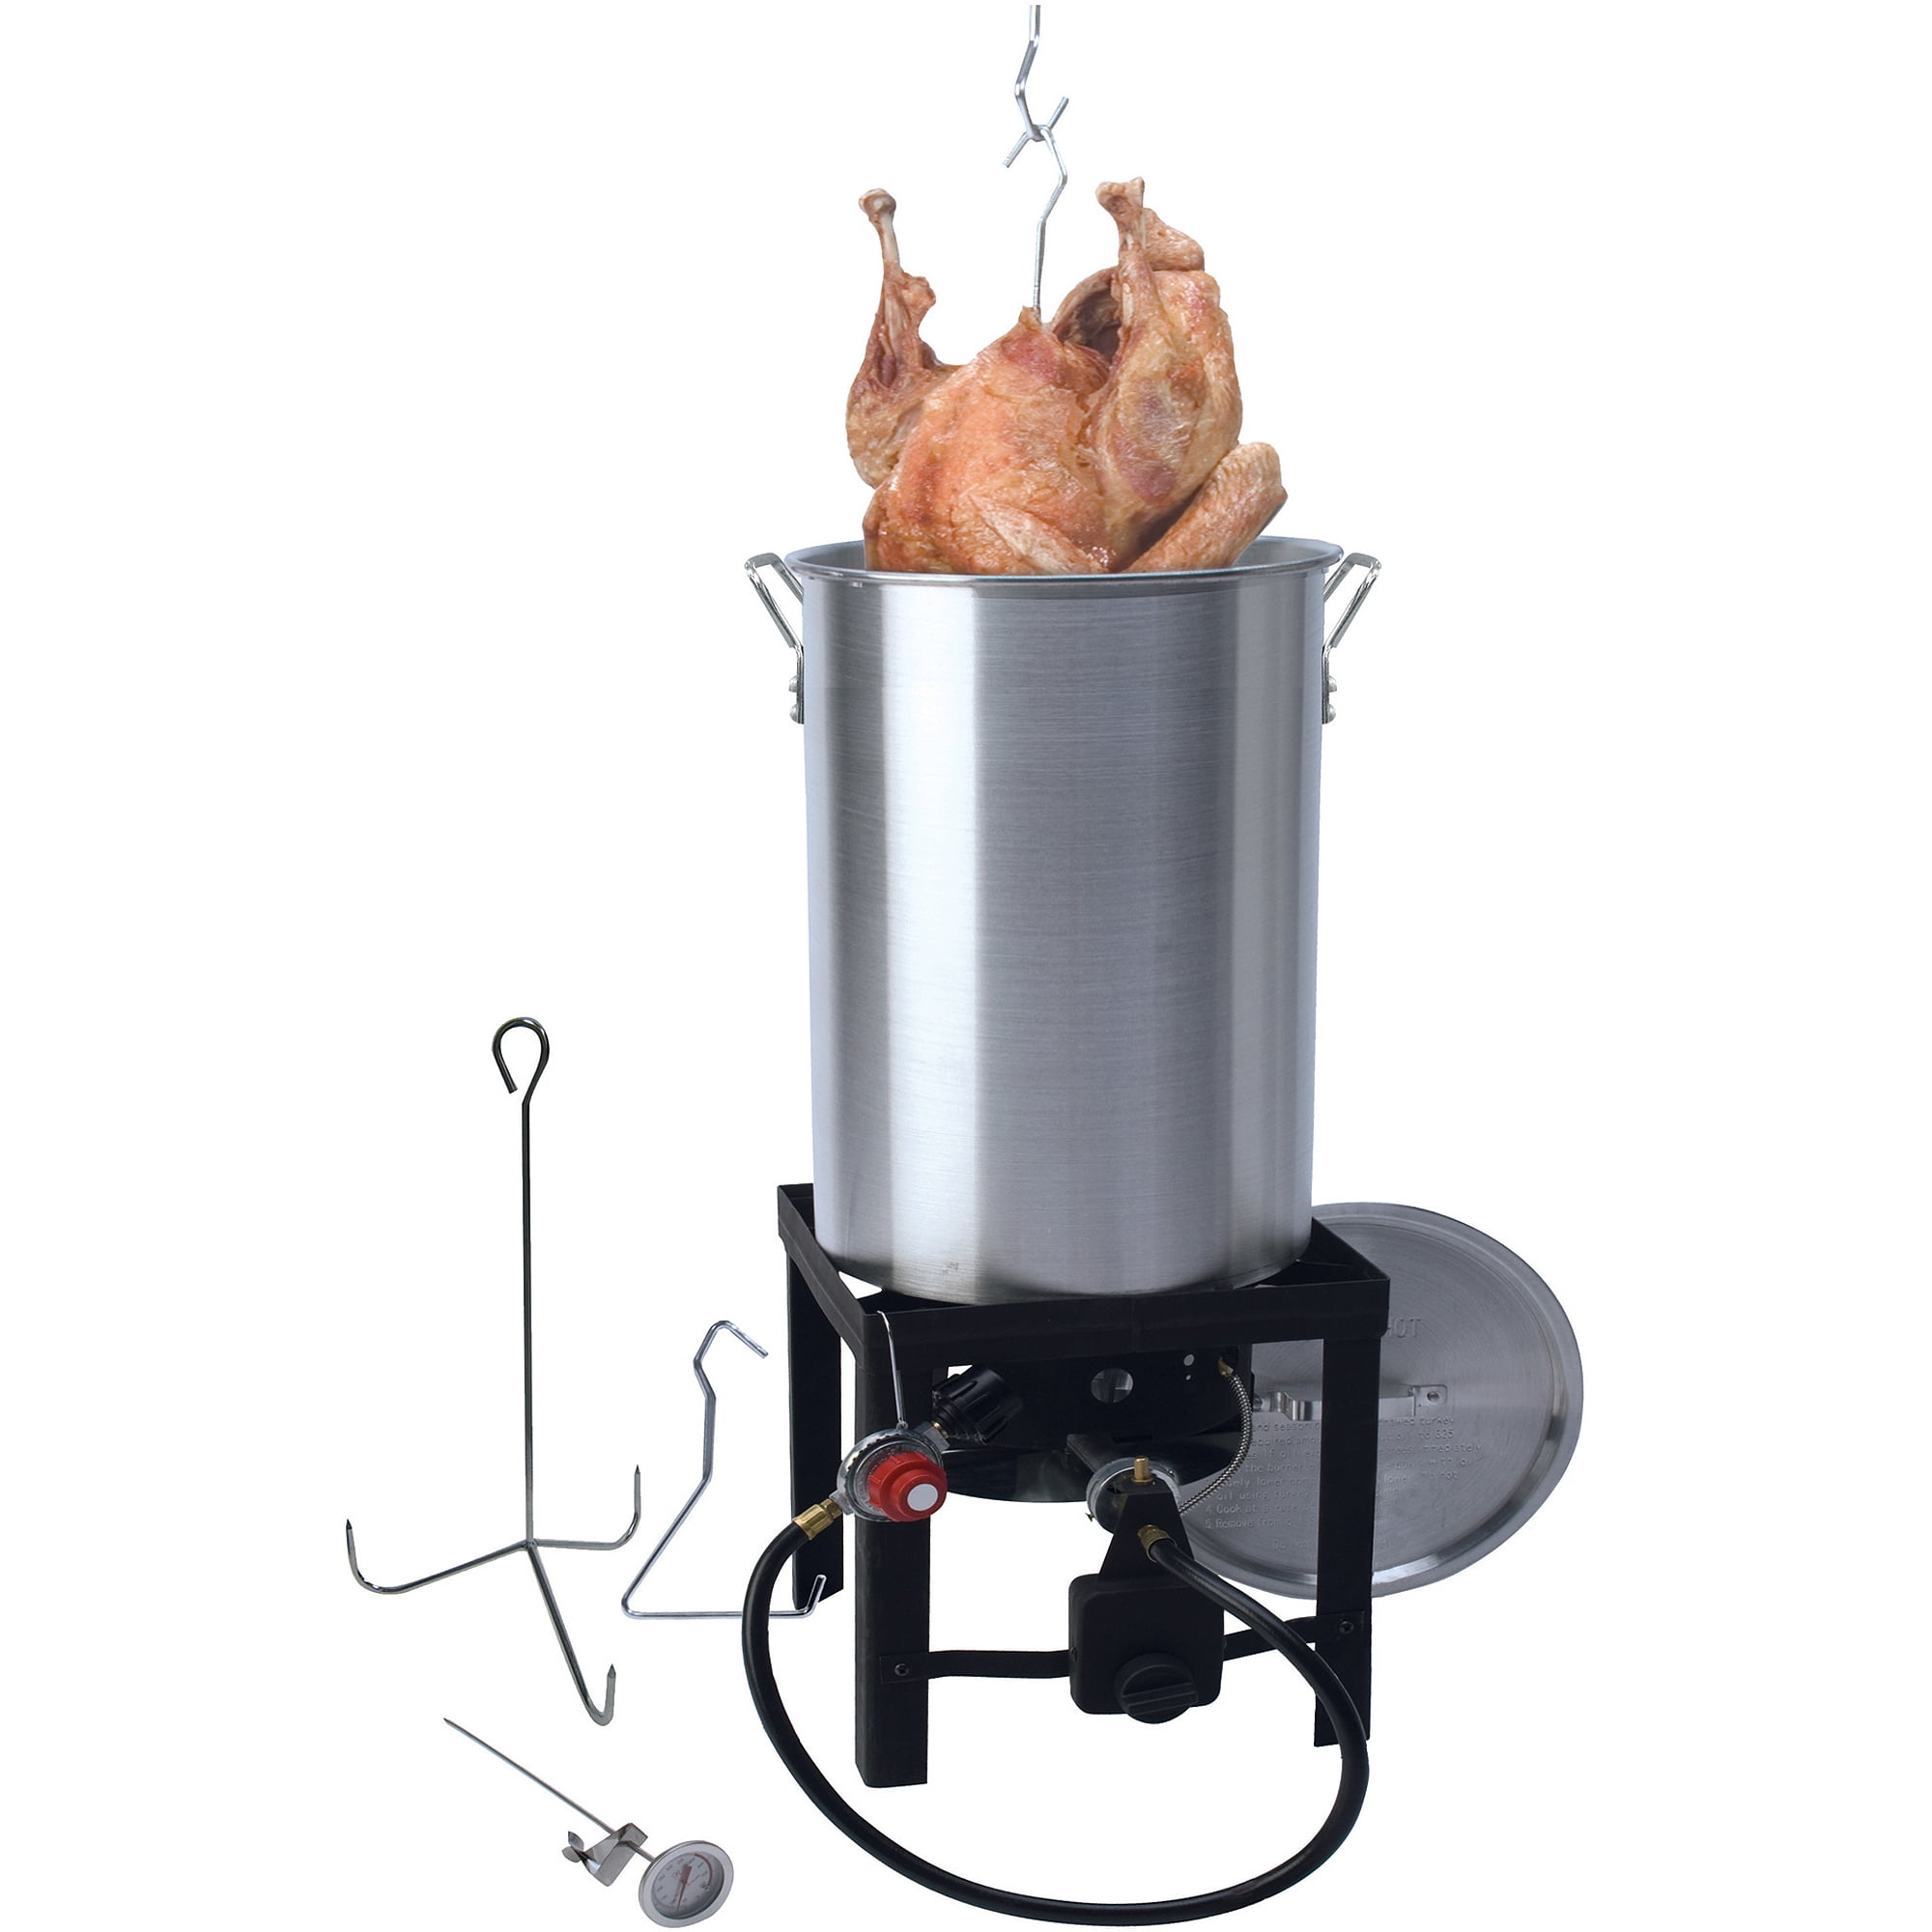 Turkey Fryer Kit - Prime Time Party and Event Rental